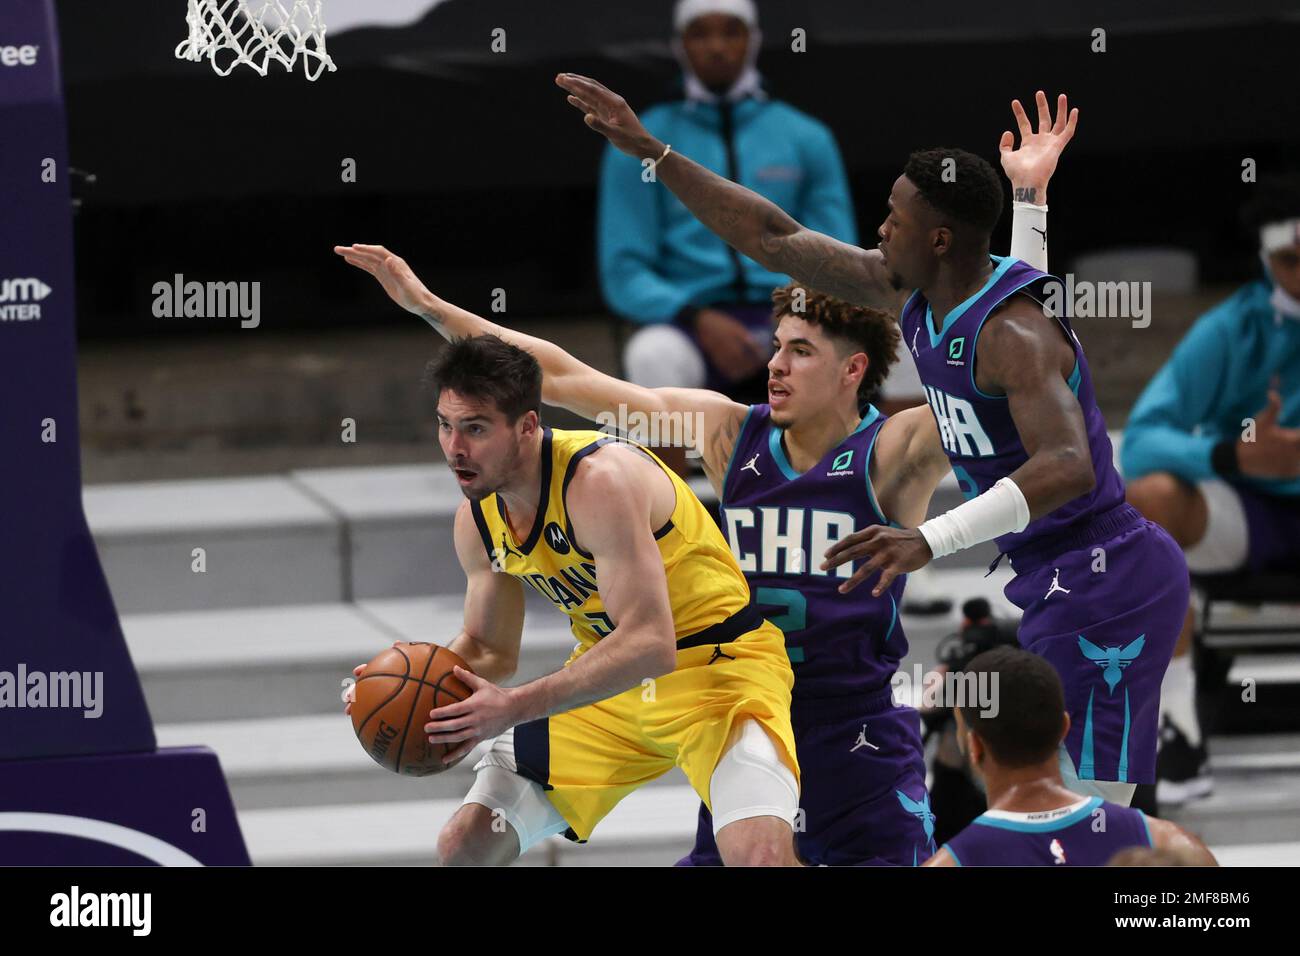 Los Angeles Lakers forward LeBron James, right, dunks past Charlotte Hornets  guard LaMelo Ball (2) during the first half of an NBA basketball game  Thursday, March 18, 2021, in Los Angeles. (AP